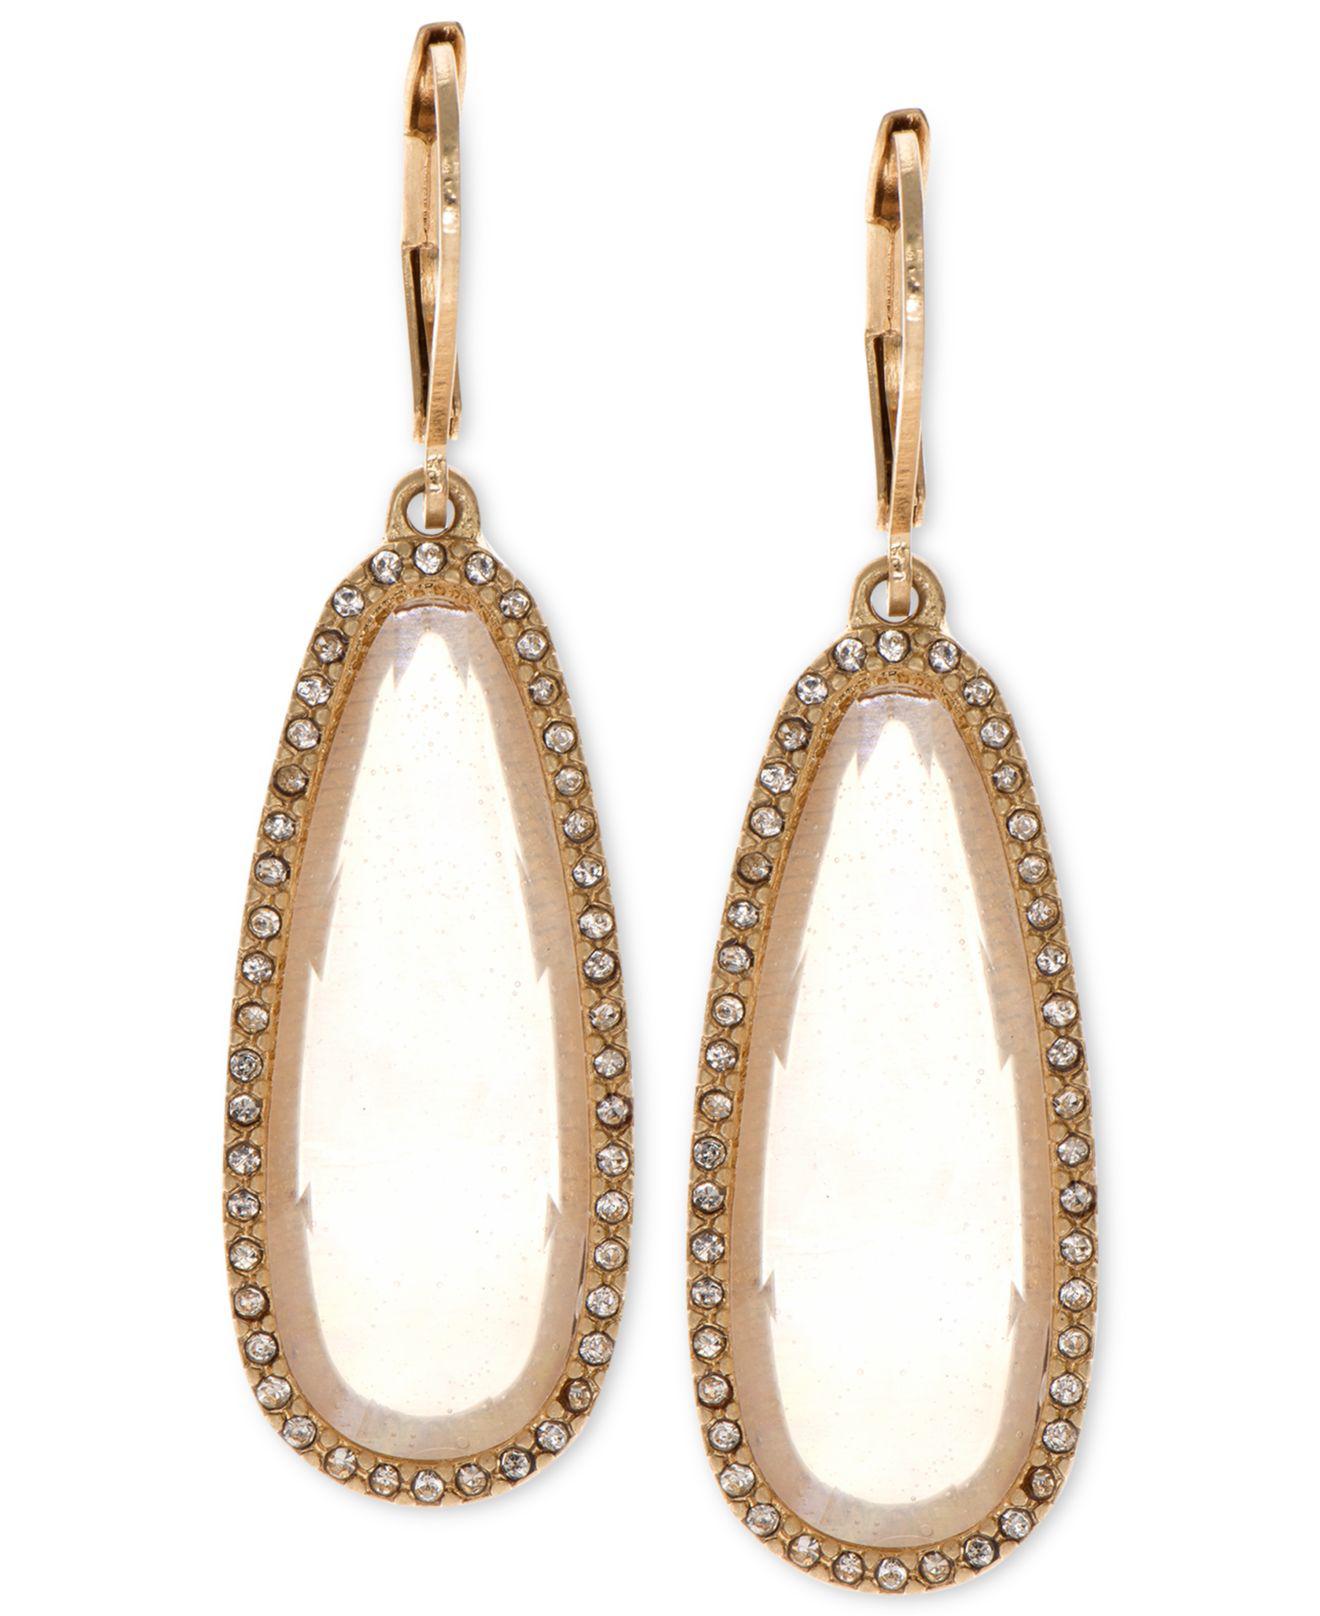 Lyst - Lonna & Lilly Large Stone Drop Earrings in White - Save 25.0%